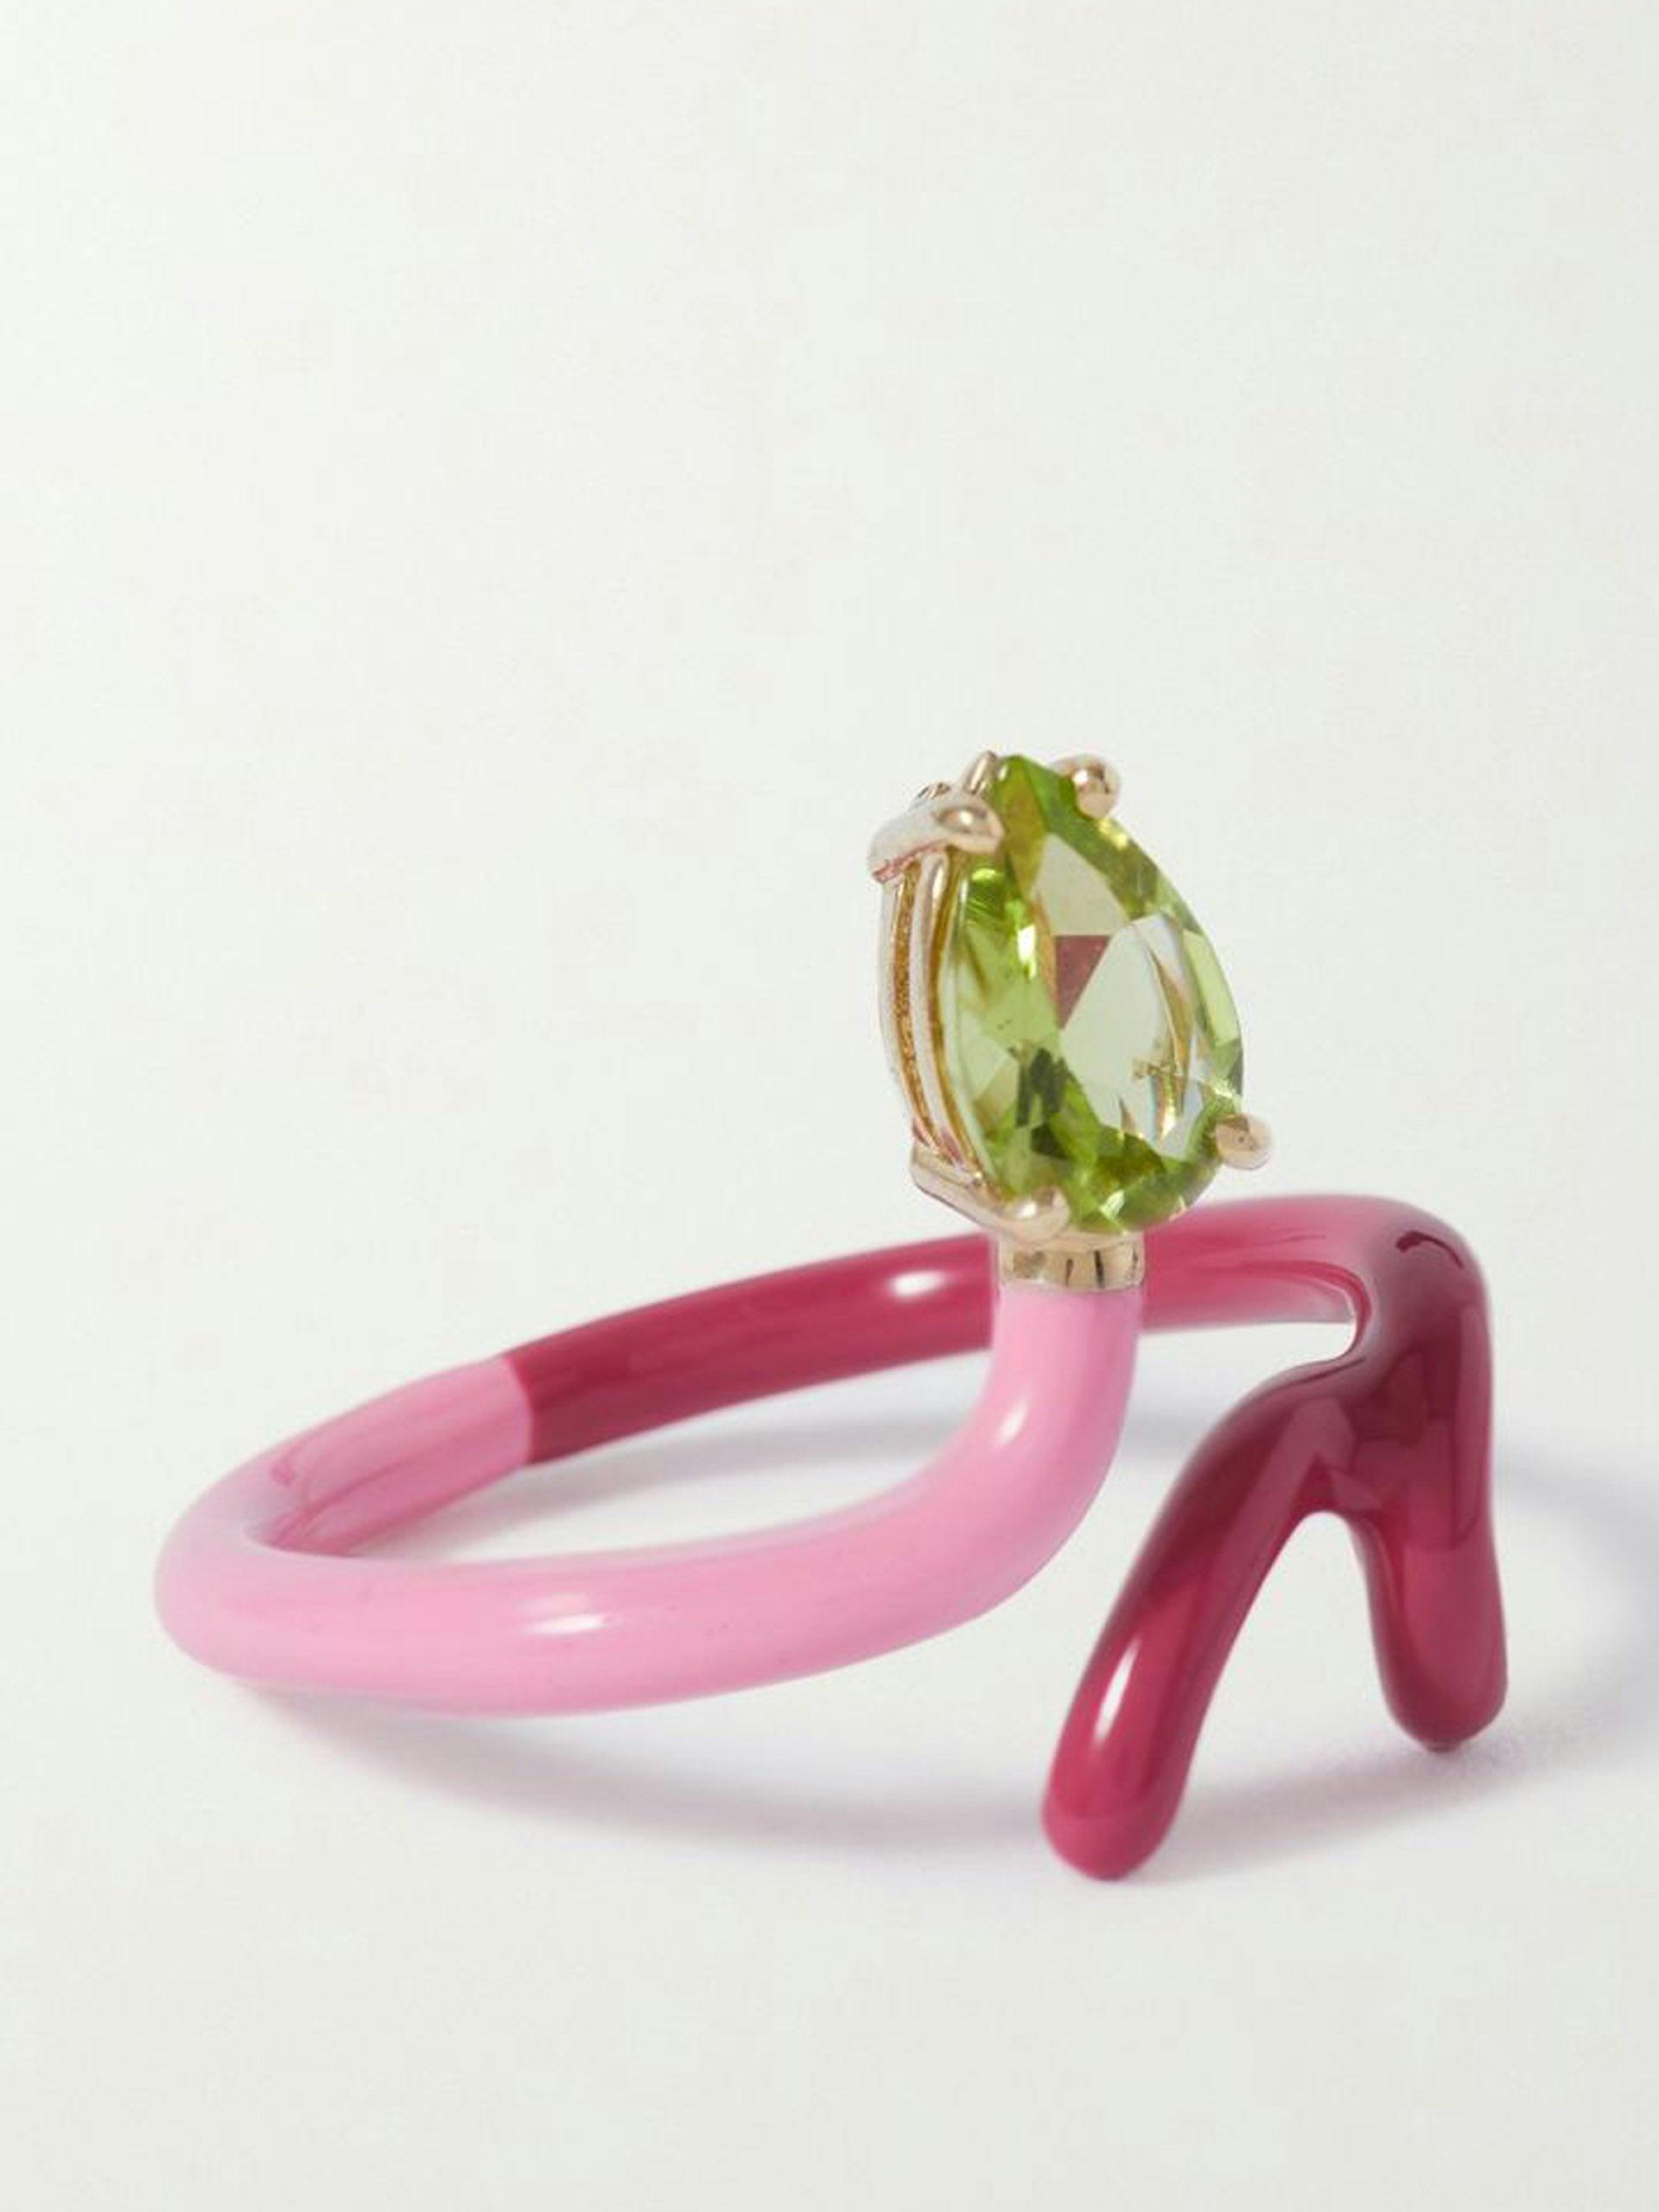 Baby Vine gold, silver, peridot and enamel ring